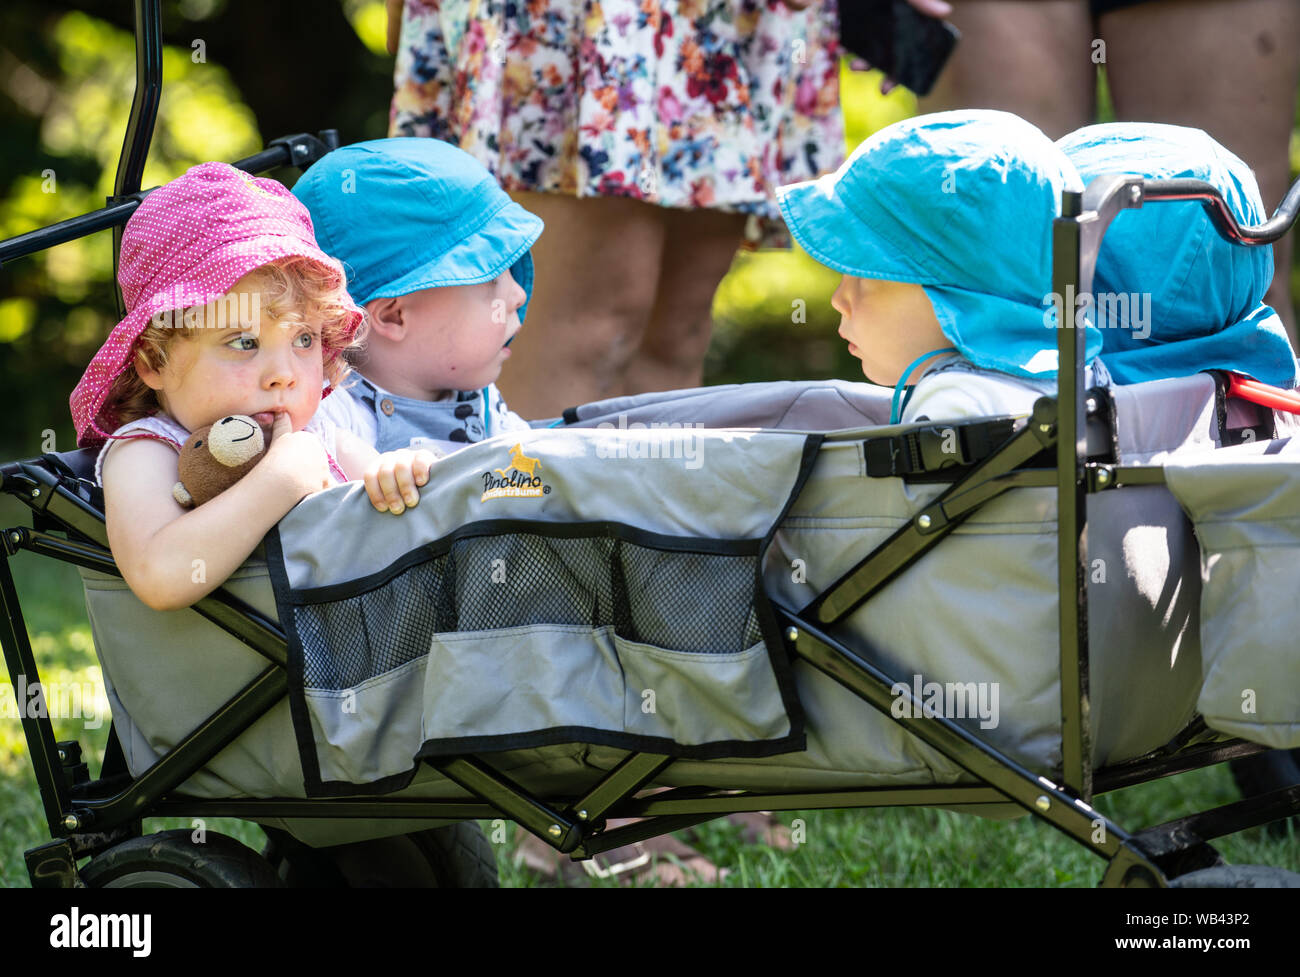 24 August 2019, Hessen, Lich: The two-year-old quadruplets Maja (l-r), Bruno, Paul, Oskar from Giessen sit in their little cart at the triplet meeting of the Hessian Prime Minister. In Hesse, the traditional head of government takes over the honorary sponsorships until the children start school. Photo: Frank Rumpenhorst/dpa Stock Photo